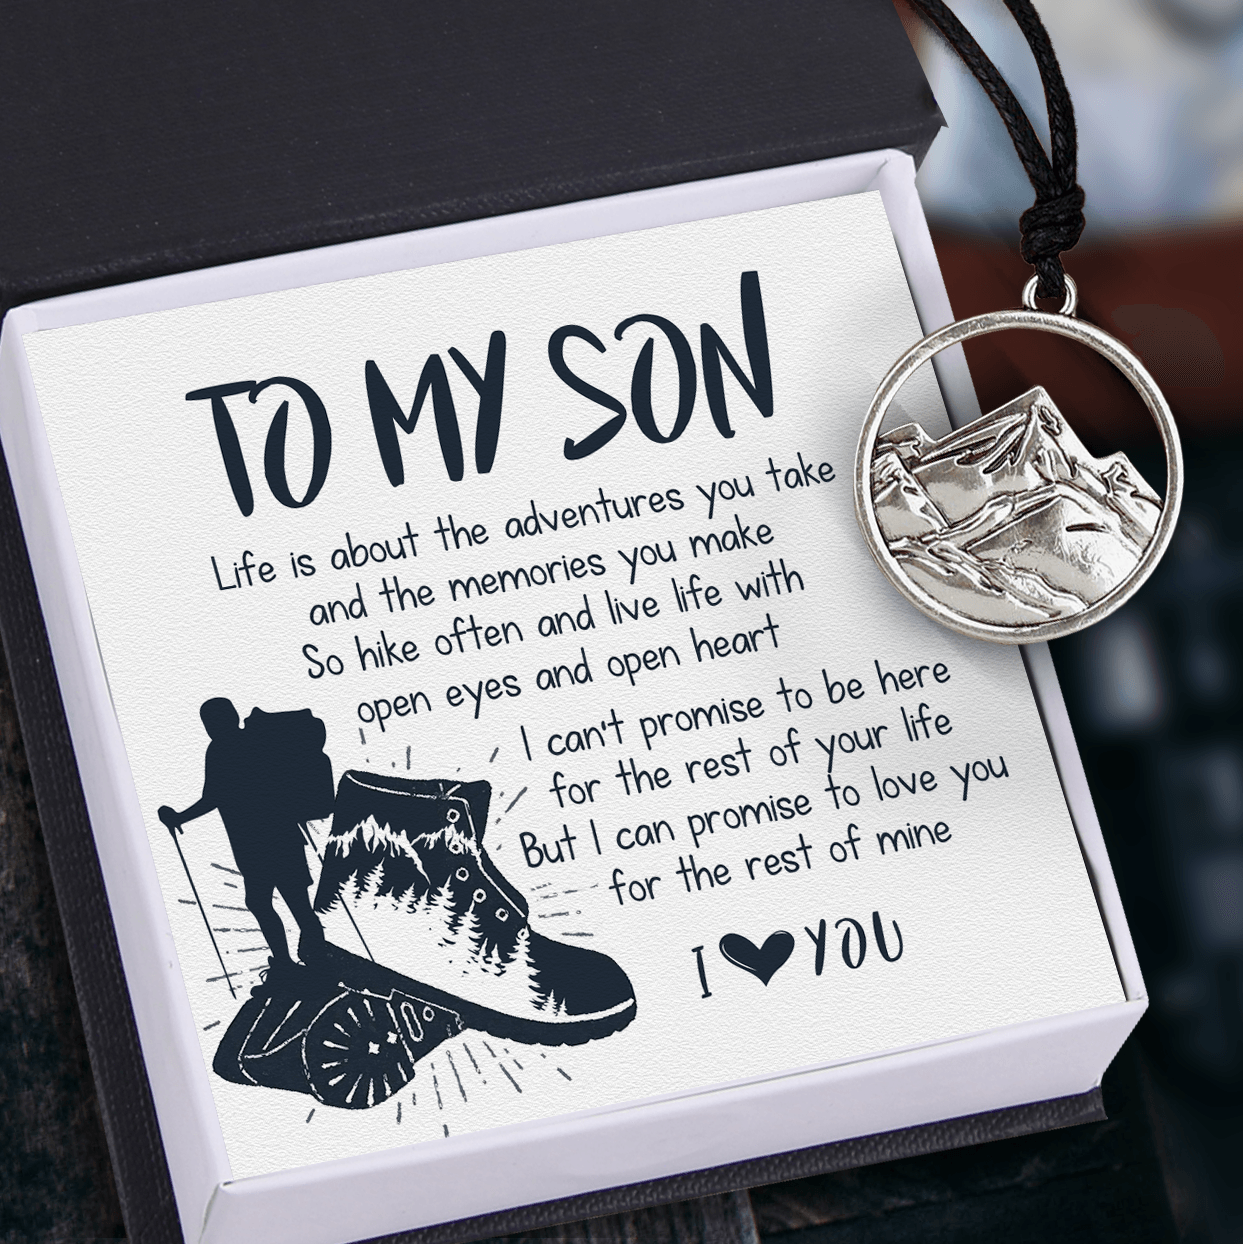 Mountain Necklace - Hiking - To My Son - I Can Promise To Love You For The Rest Of Mines - Augnnl16004 - Gifts Holder